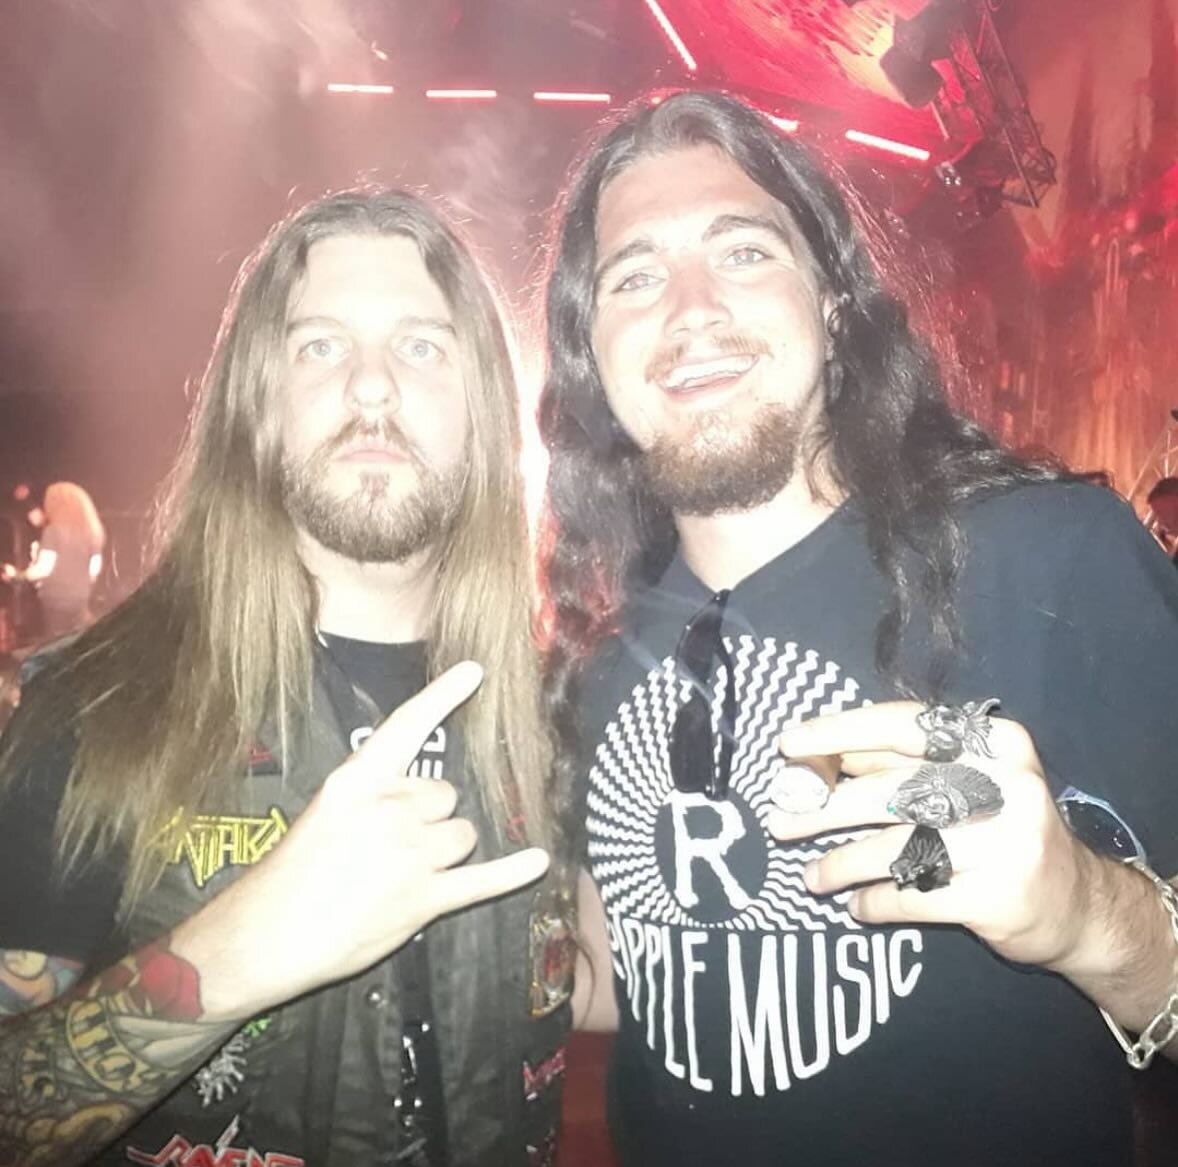 Our very own Justin Roth hanging with @blacklightmediaofficial &lsquo;s Matt Bacon, watching War Curse manager @kragenlum play in @exodusbandofficial side stage - Hellfest 2018. None of us were in the positions we&rsquo;re in now, back then. Reminder